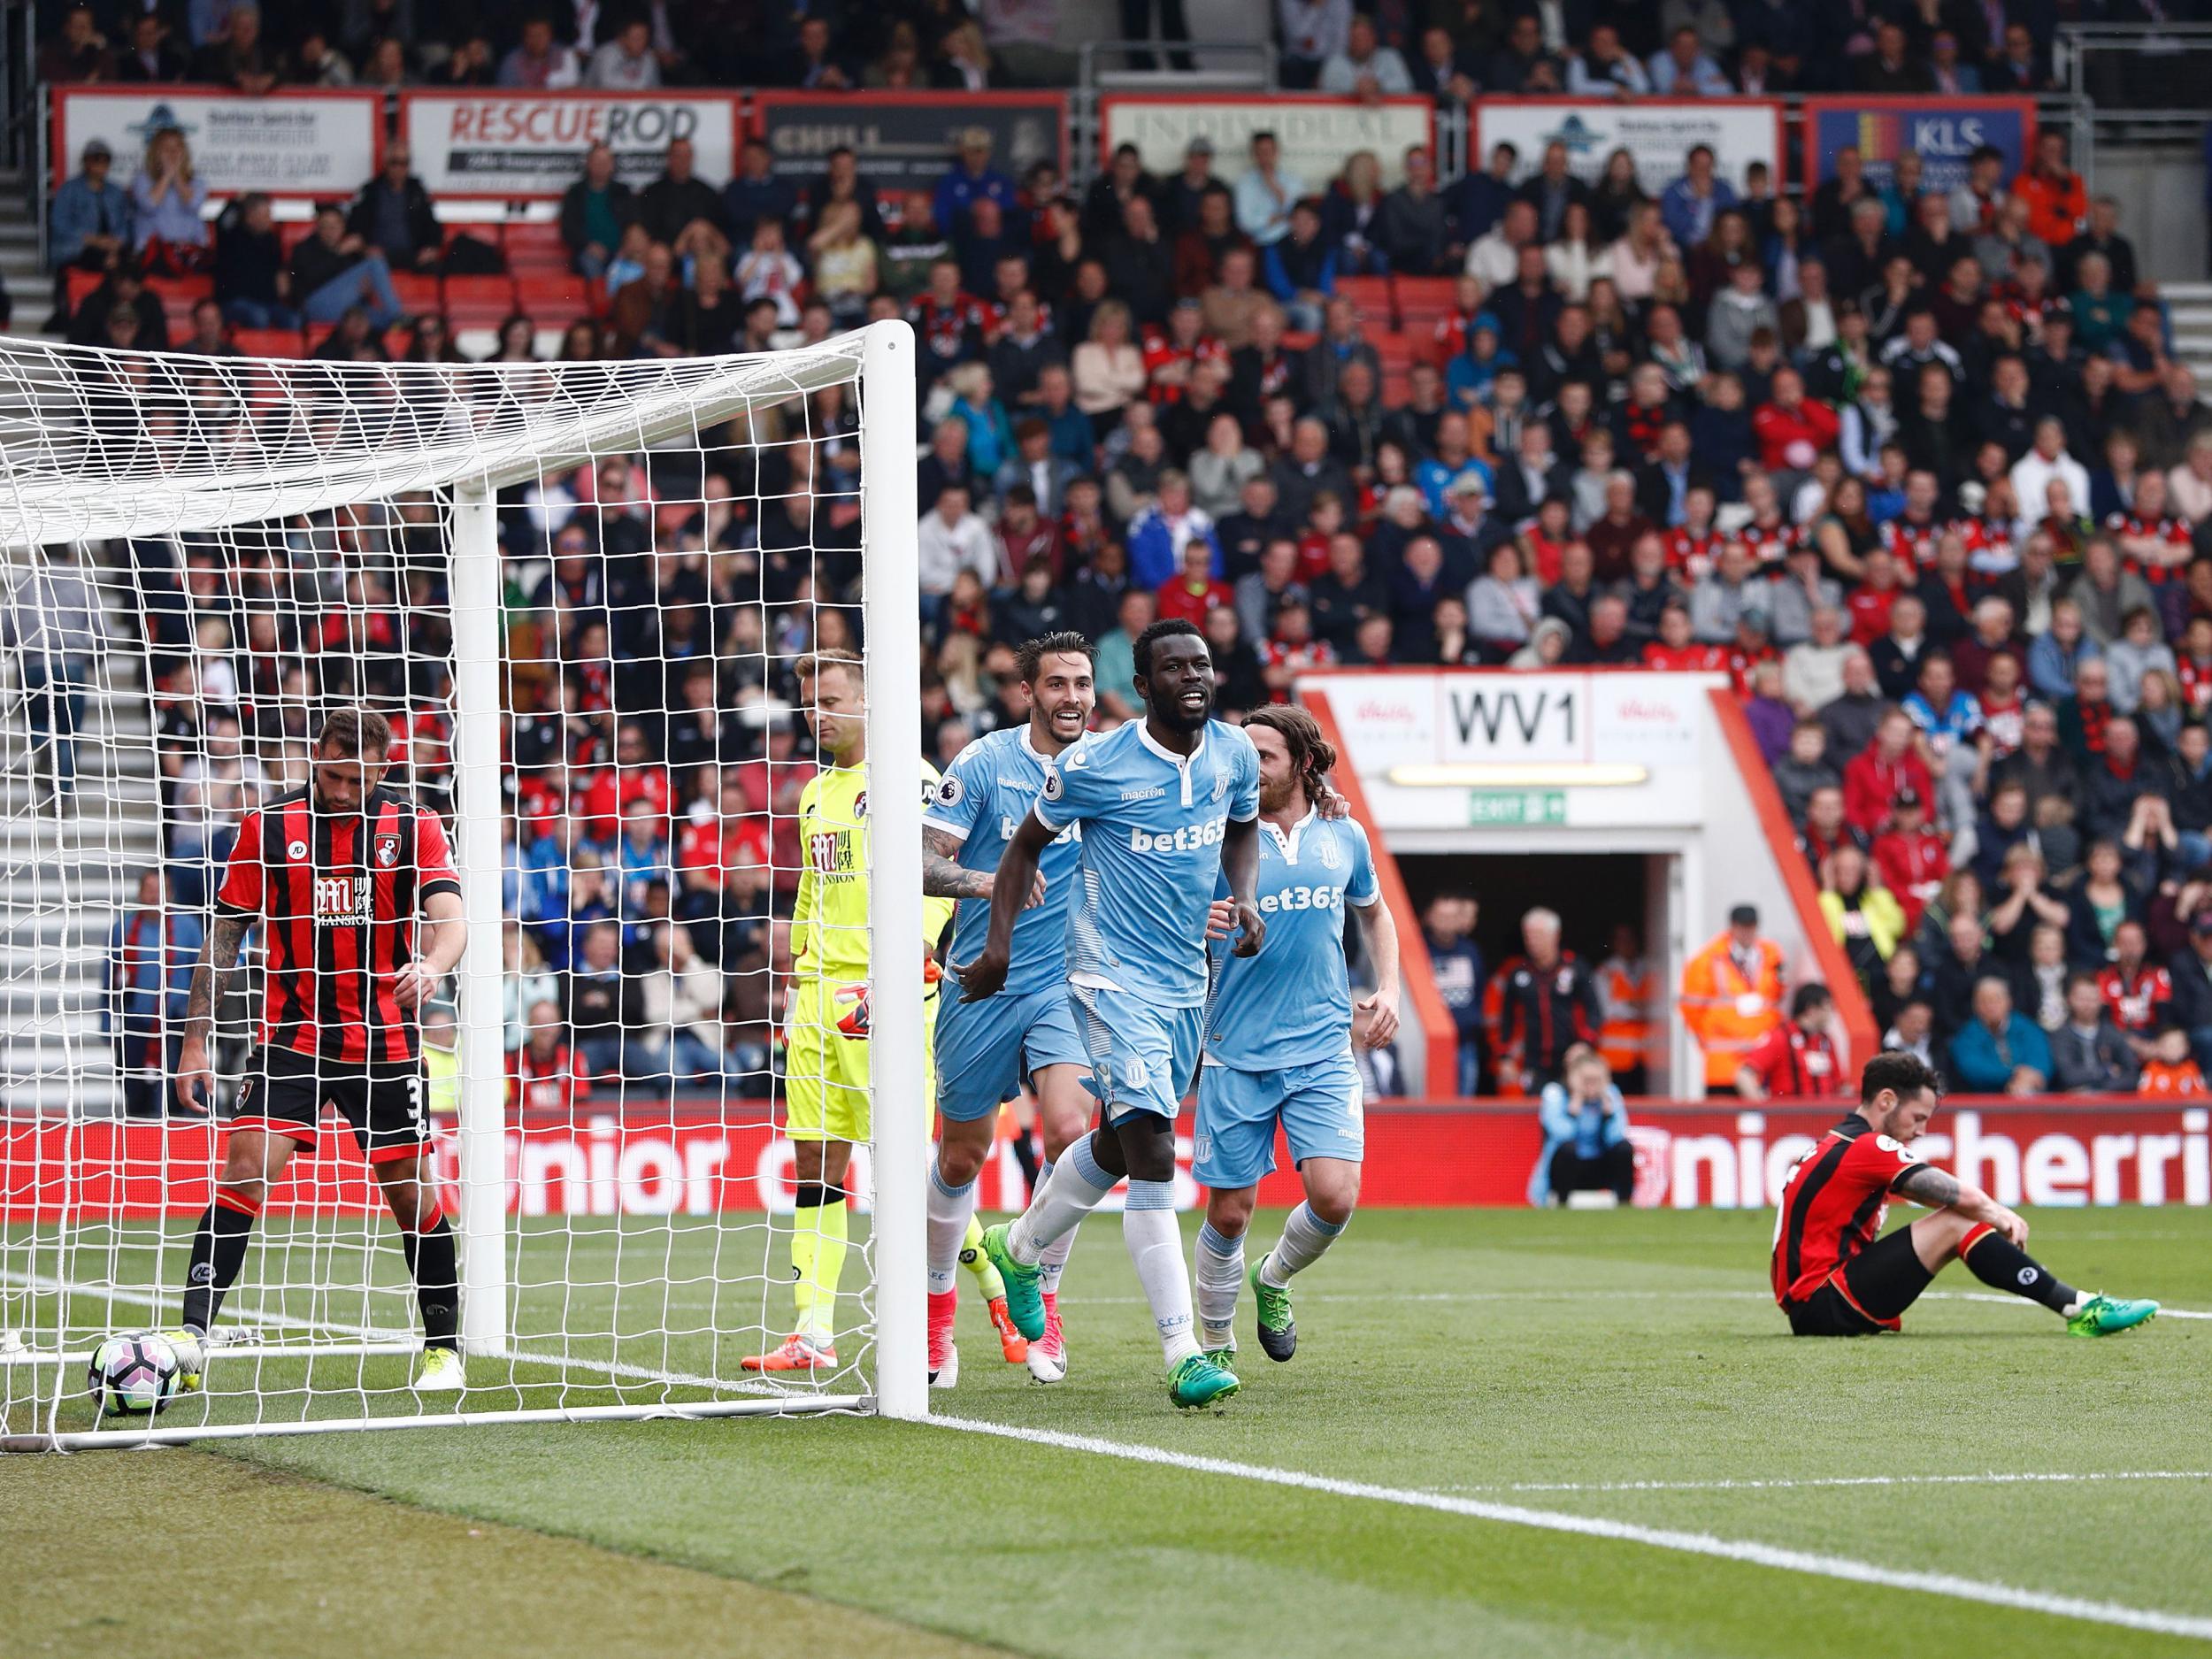 Diouf's goal gave Stoke the lead for the second time in the game